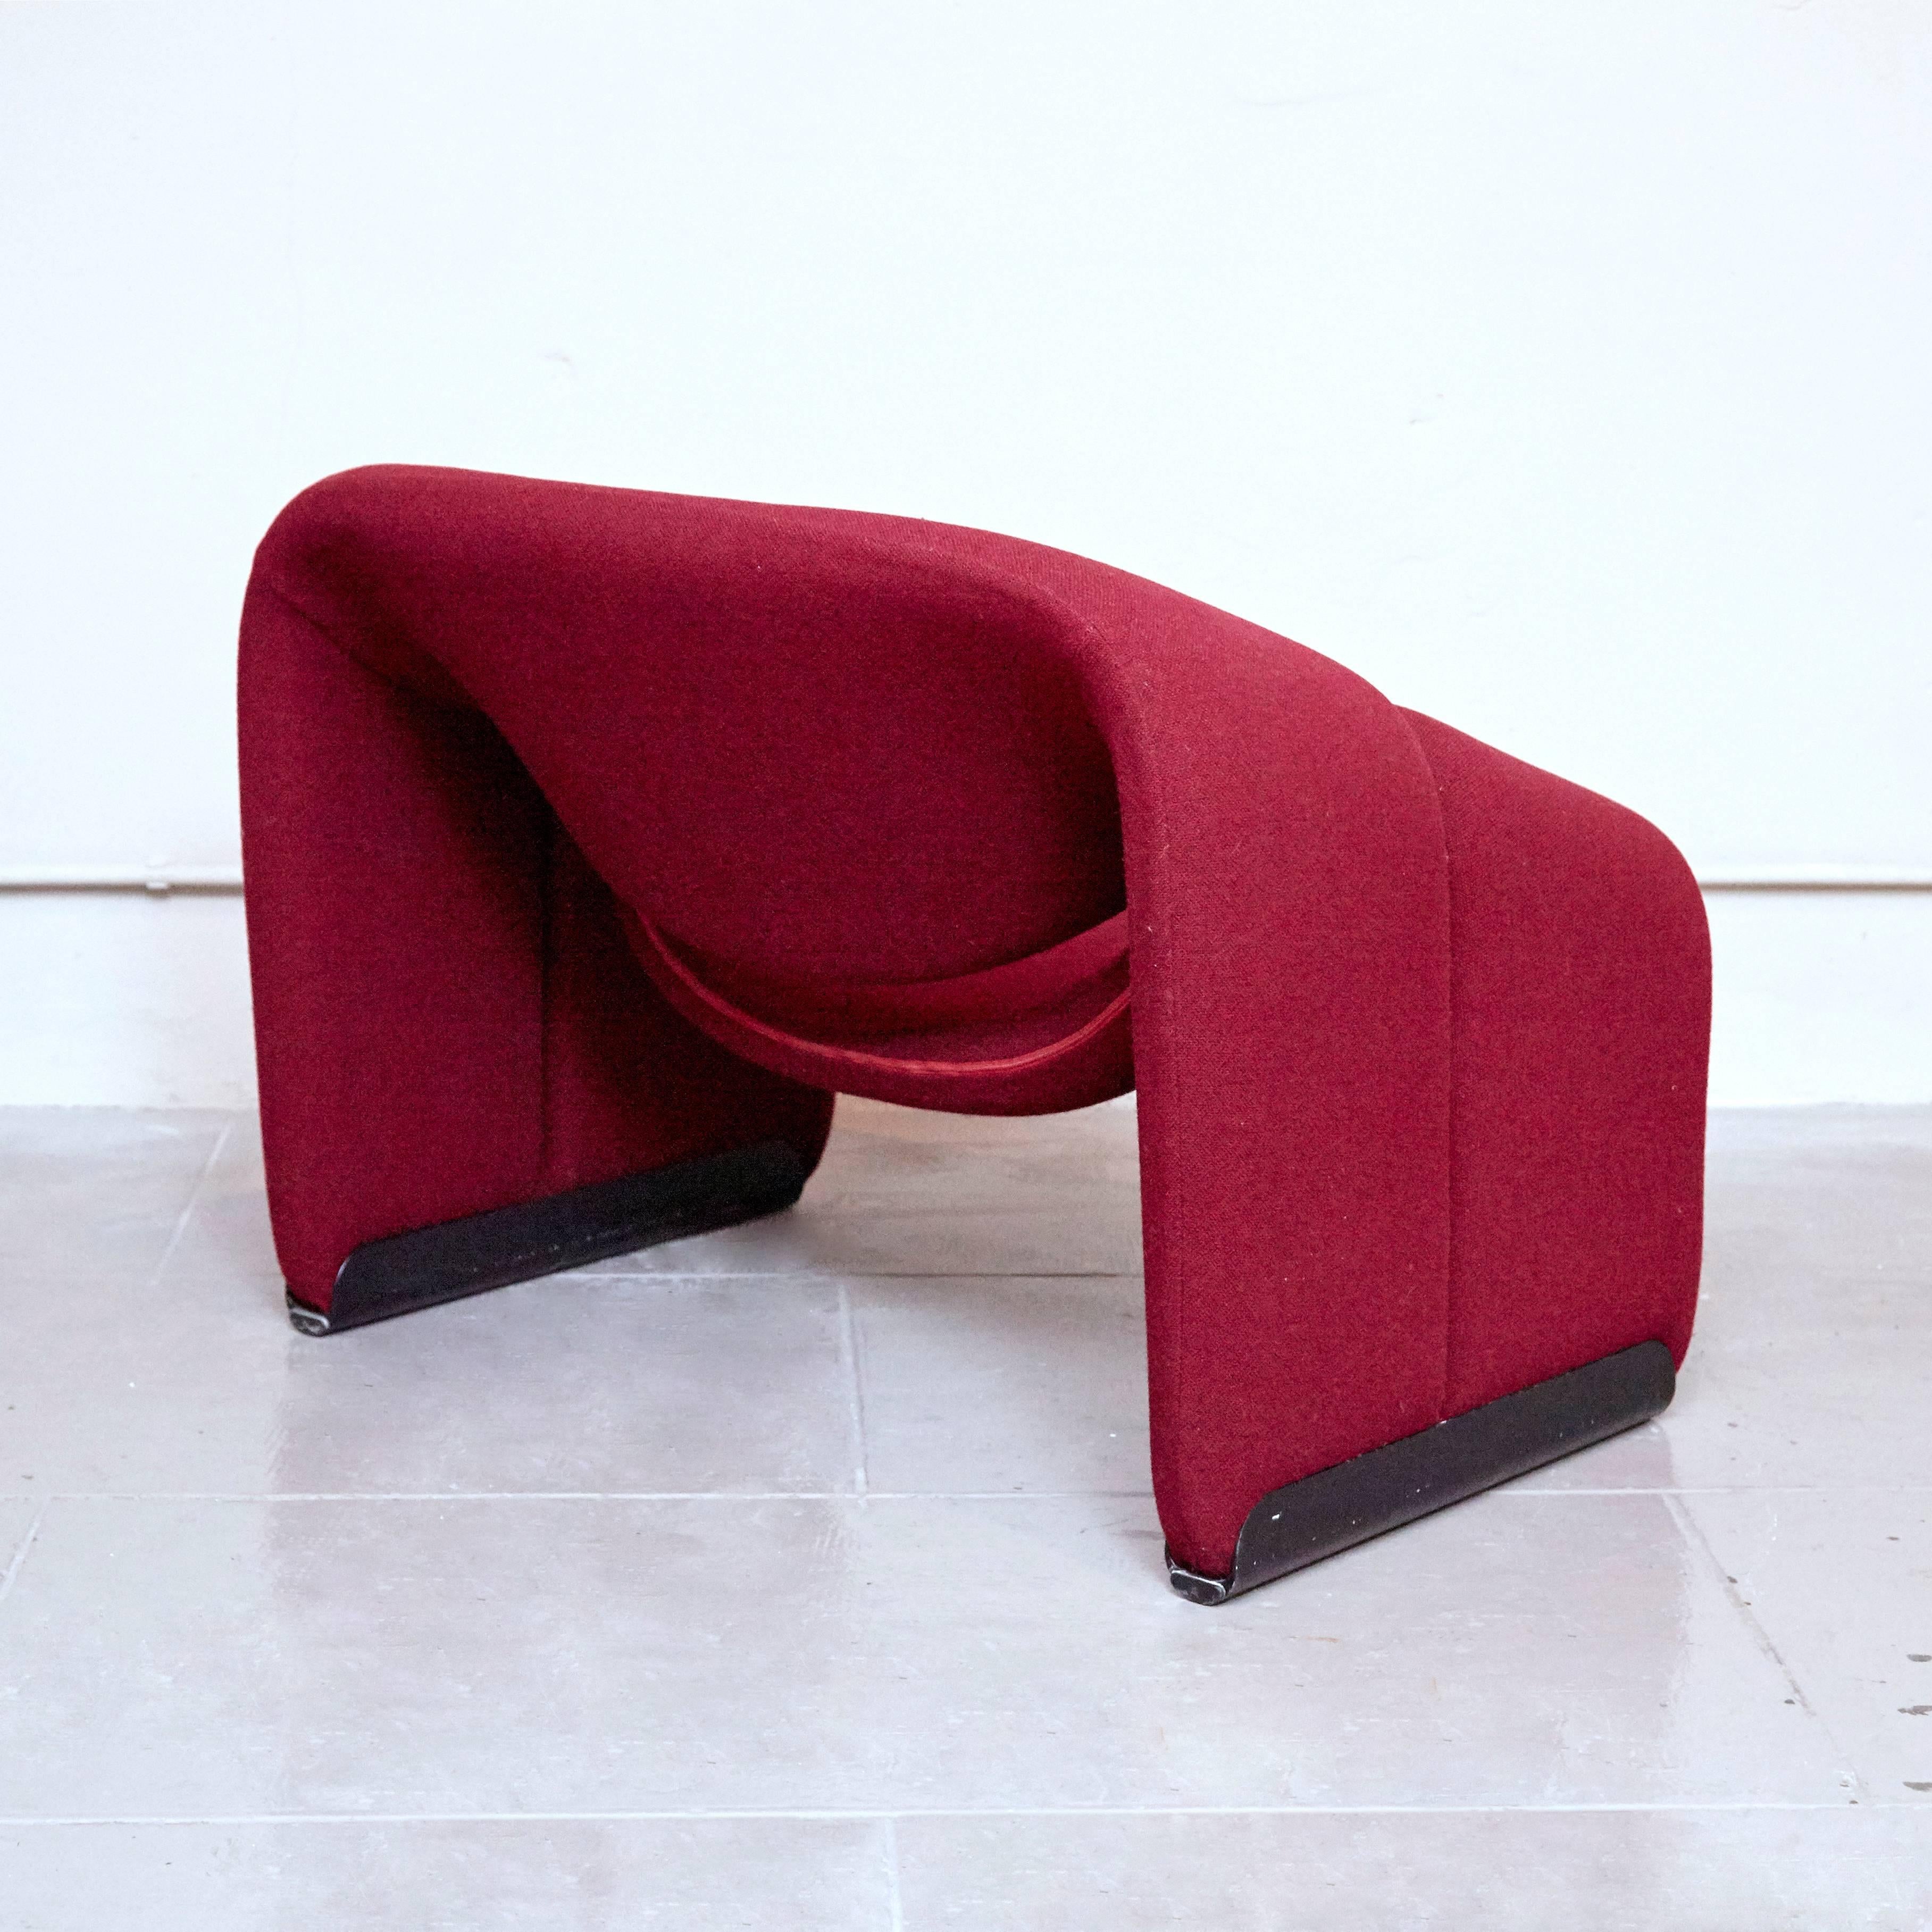 French Piere Paulin Groovy Lounge Chair, circa 1970